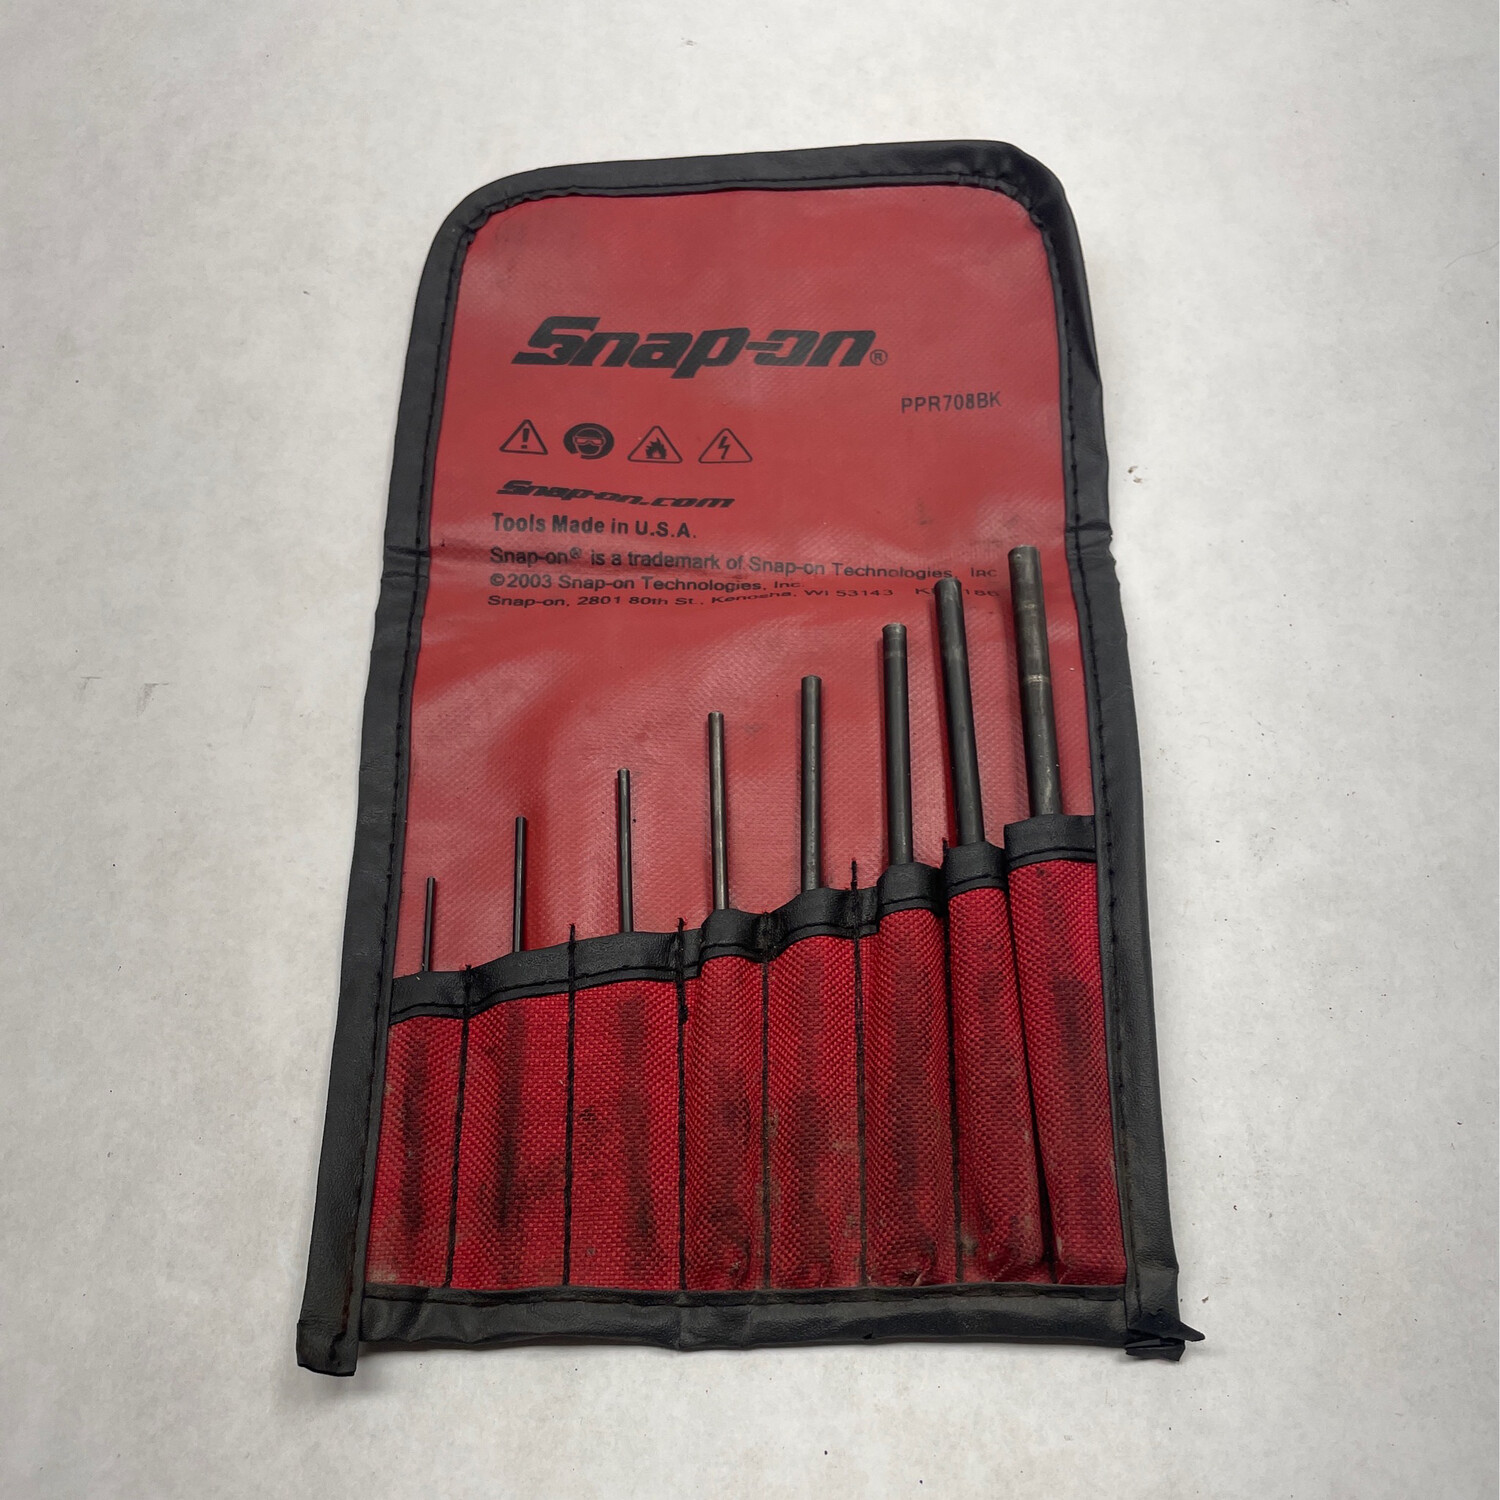 Snap on 8pc Roll Pin Punch Set, PPR708BK